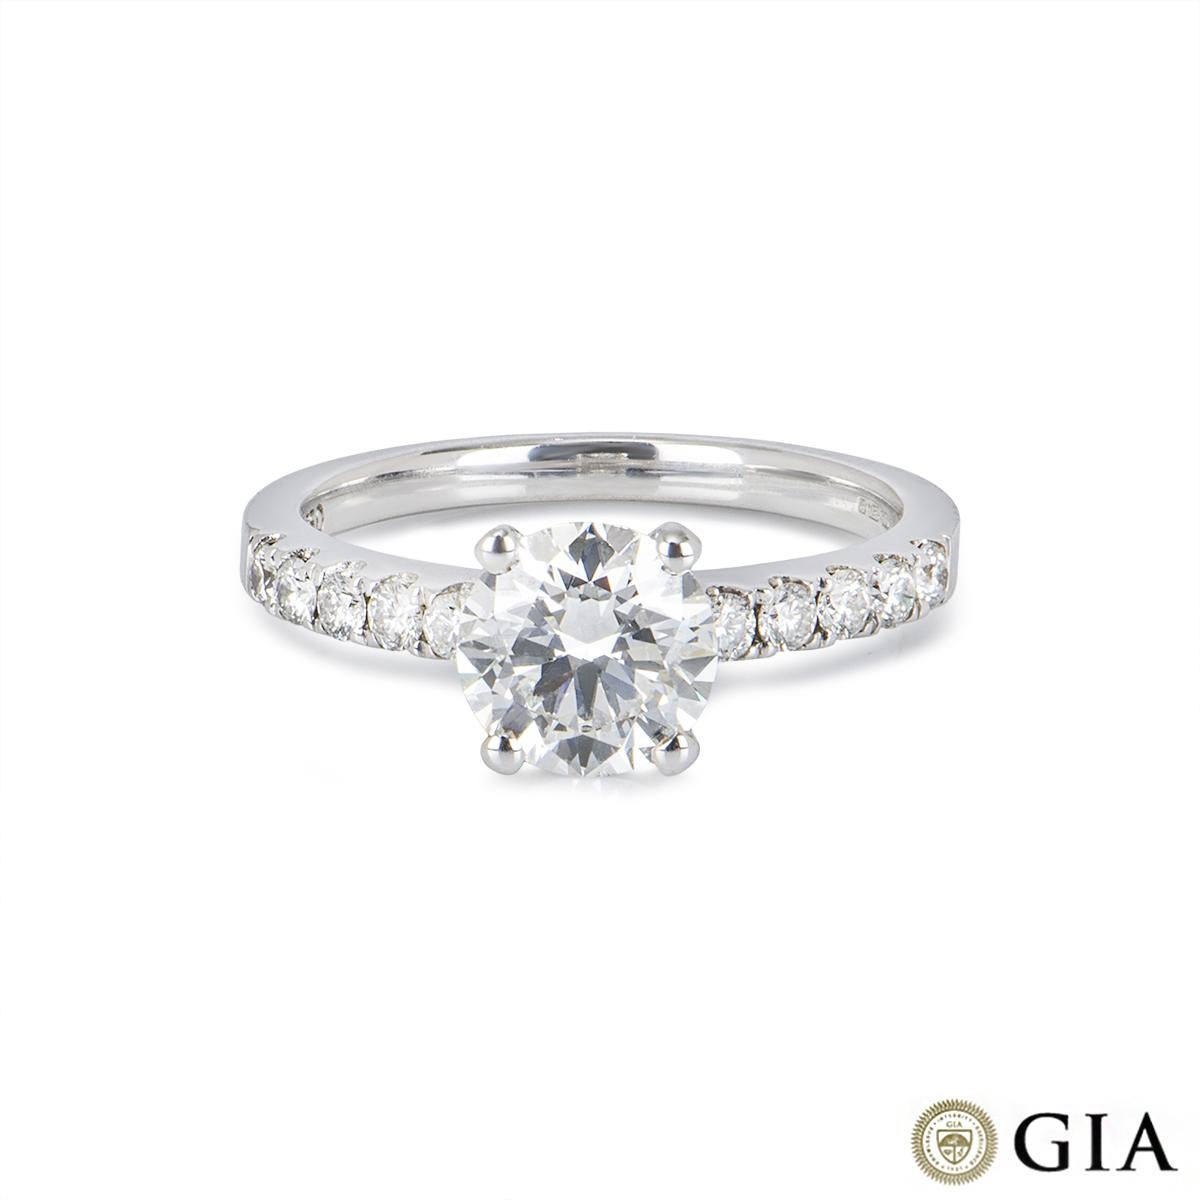 A gorgeous 18k white gold diamond engagement ring. The ring is set to the centre with a round brilliant cut diamond weighing 1.23ct, H colour, VS1 clarity and scores an excellent rating in all three aspects for cut, polish and symmetry- this is